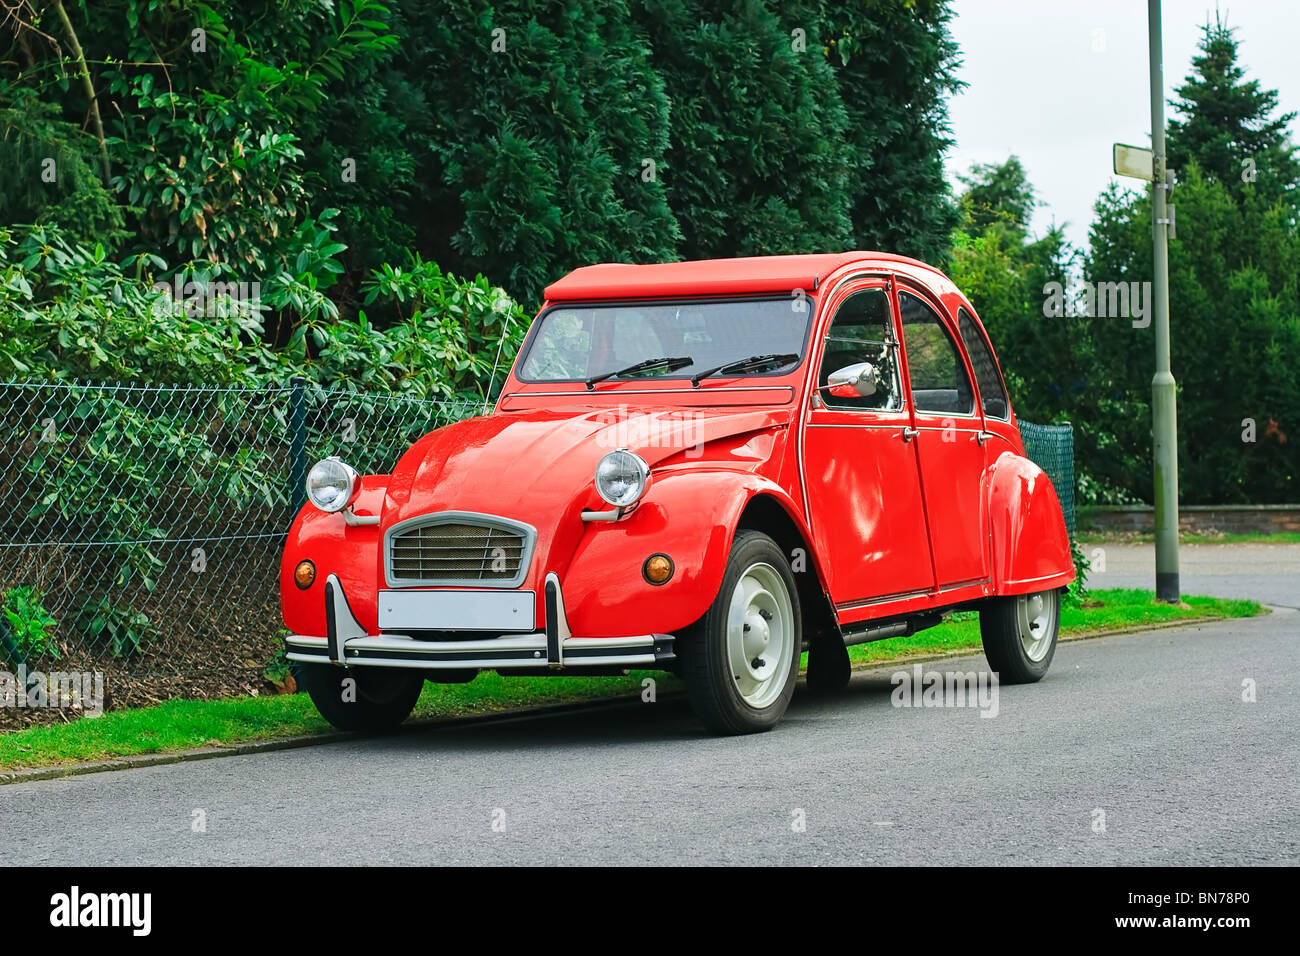 French red Citroen 2 cv parked in a street Stock Photo